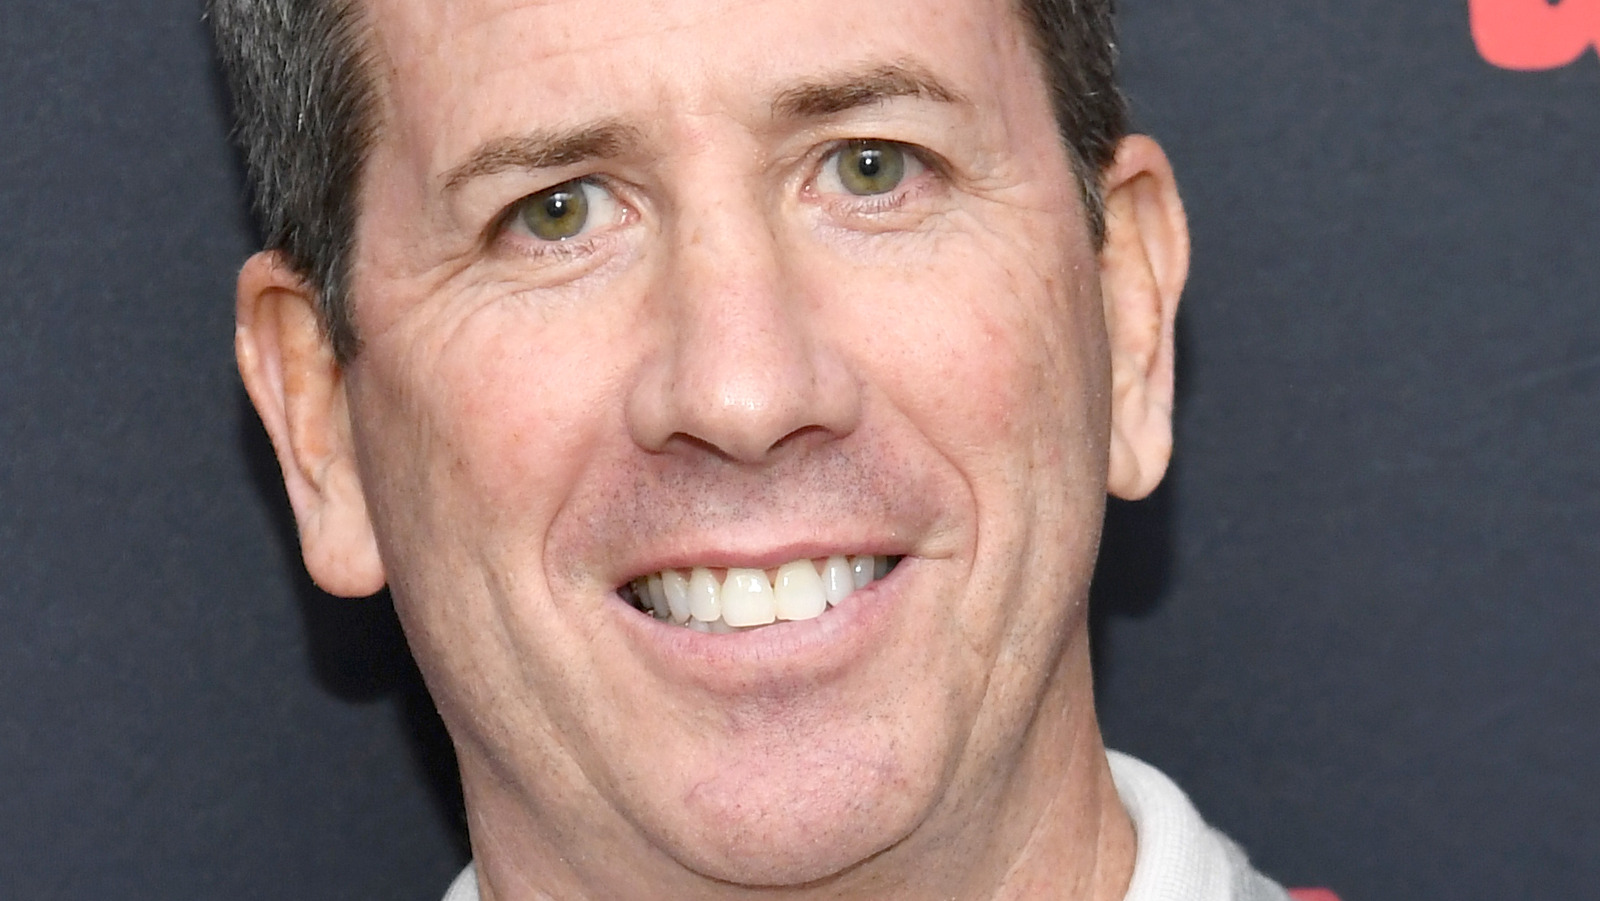 How former ref Tim Donaghy conspired to fix NBA games - ESPN